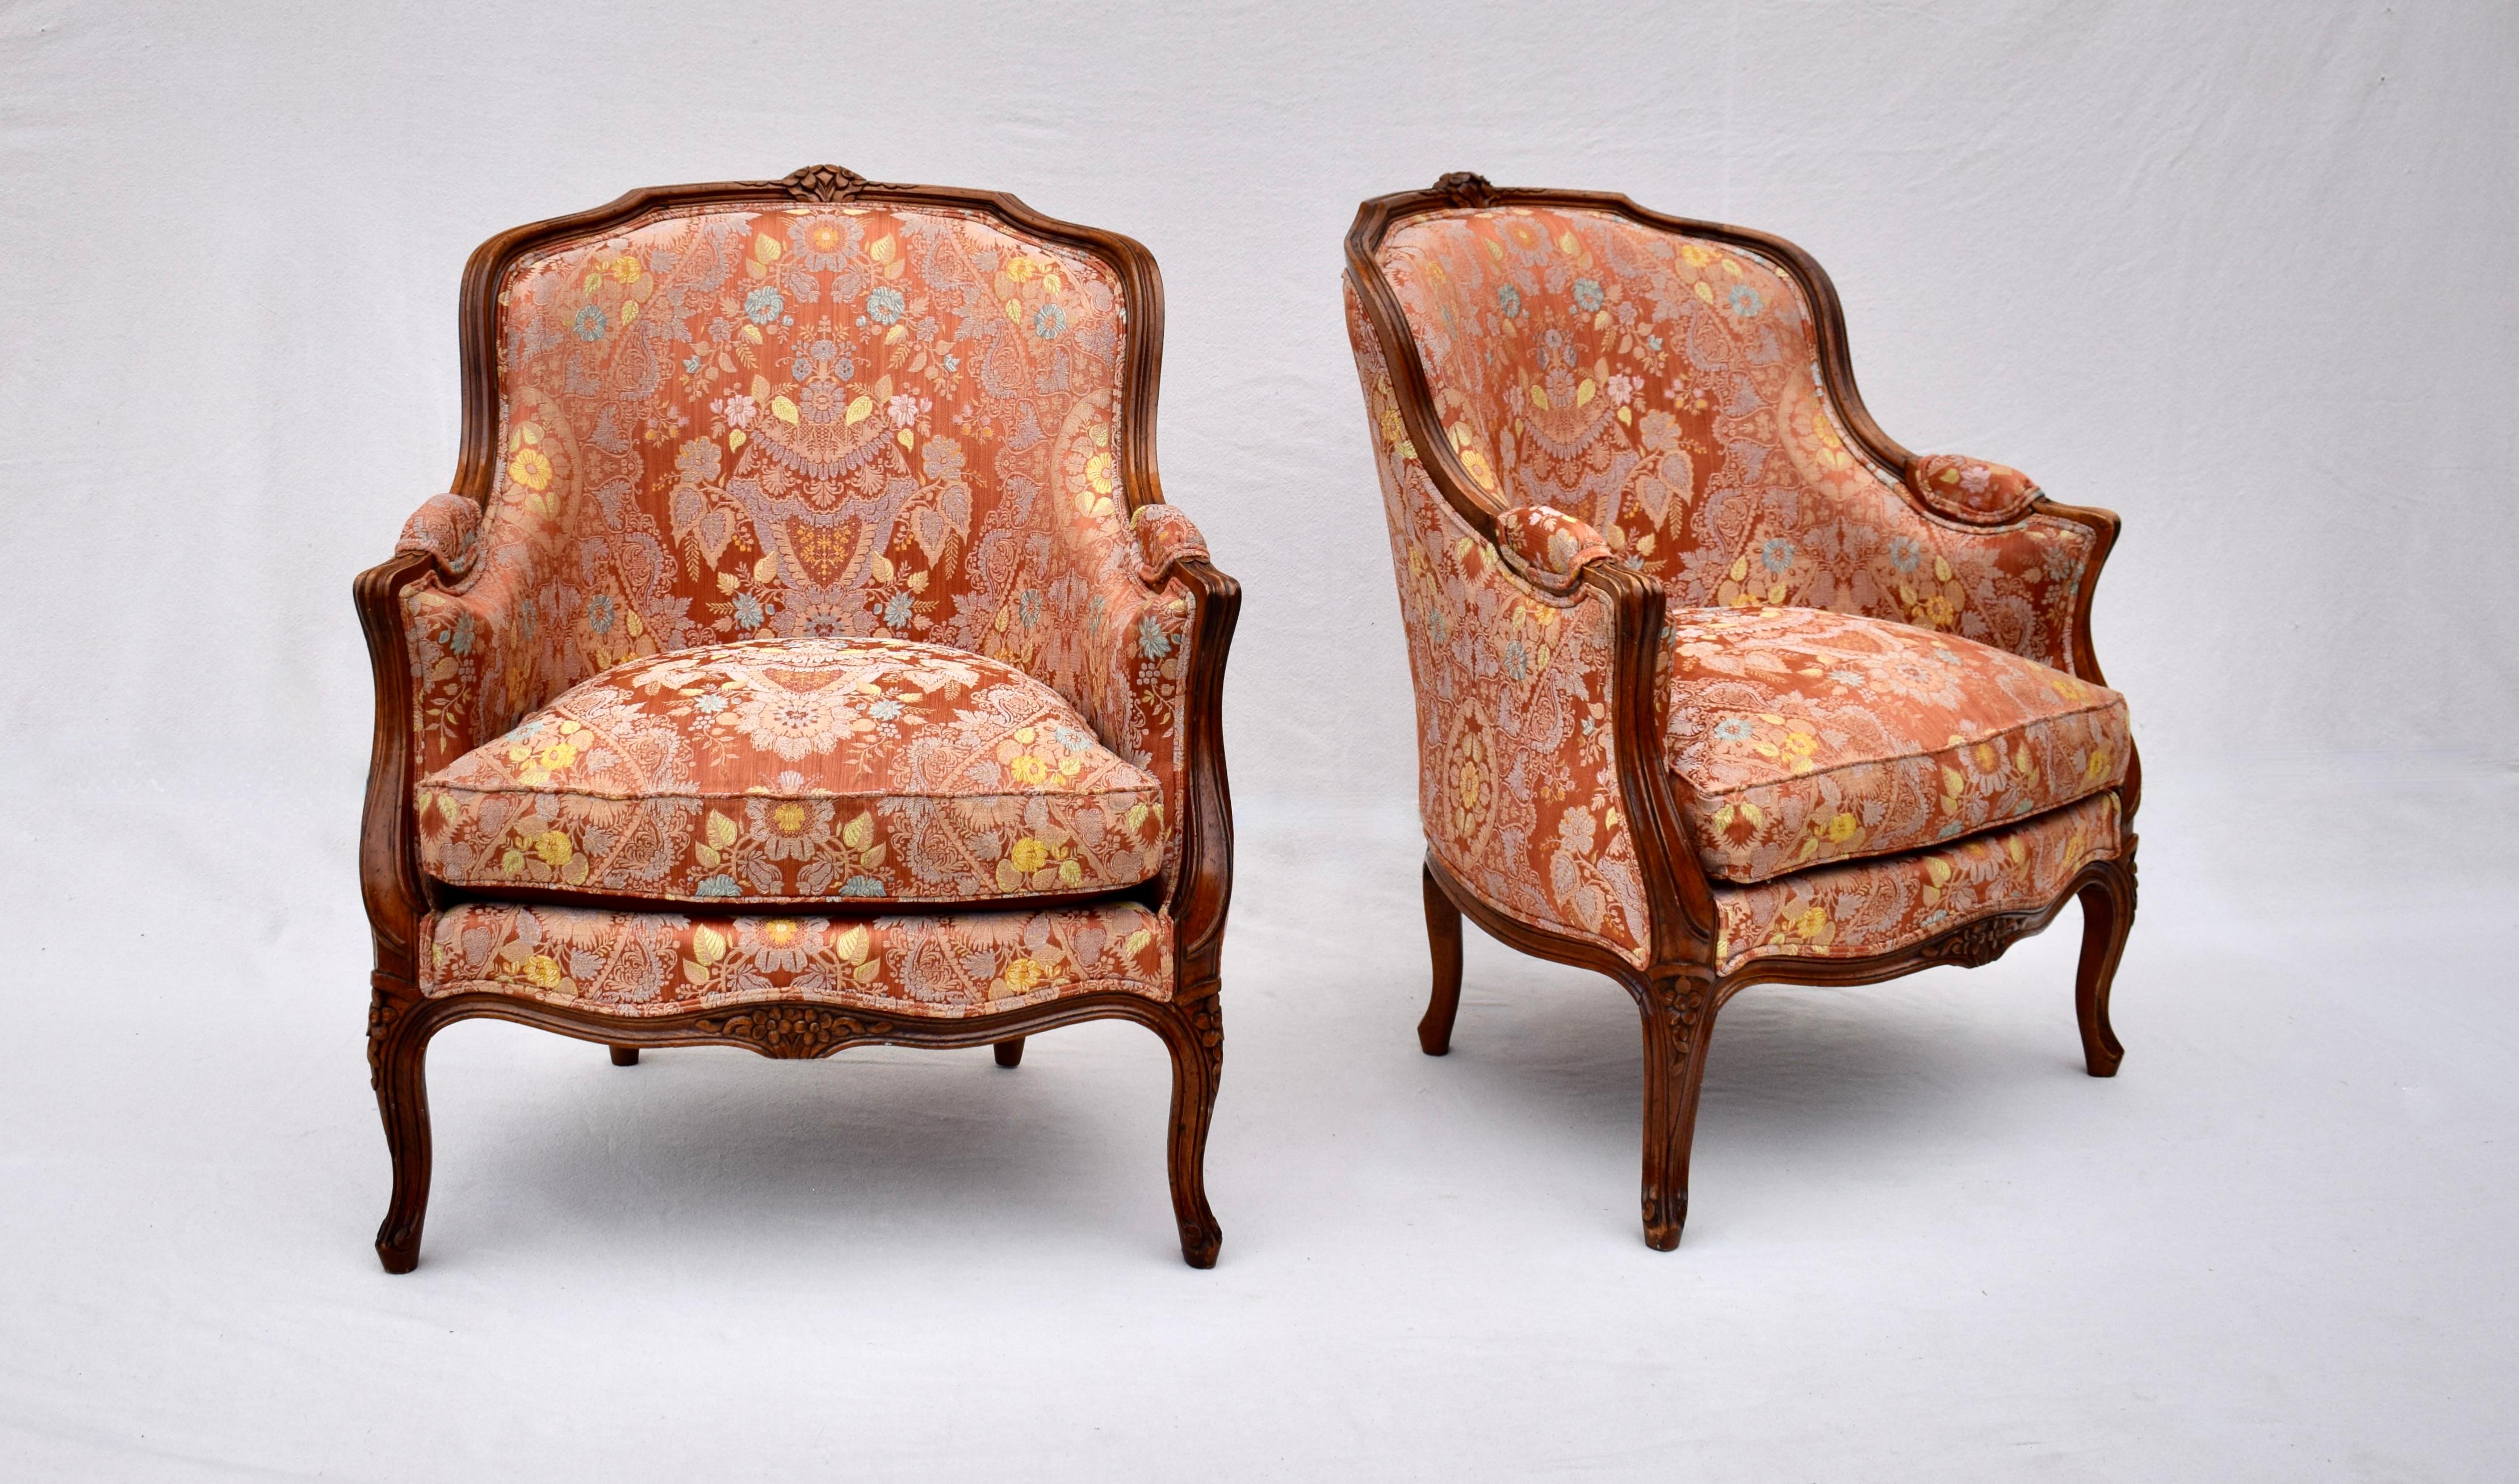 Carved Early 20th C. Louis XV Style French Bergere Chairs, Pair